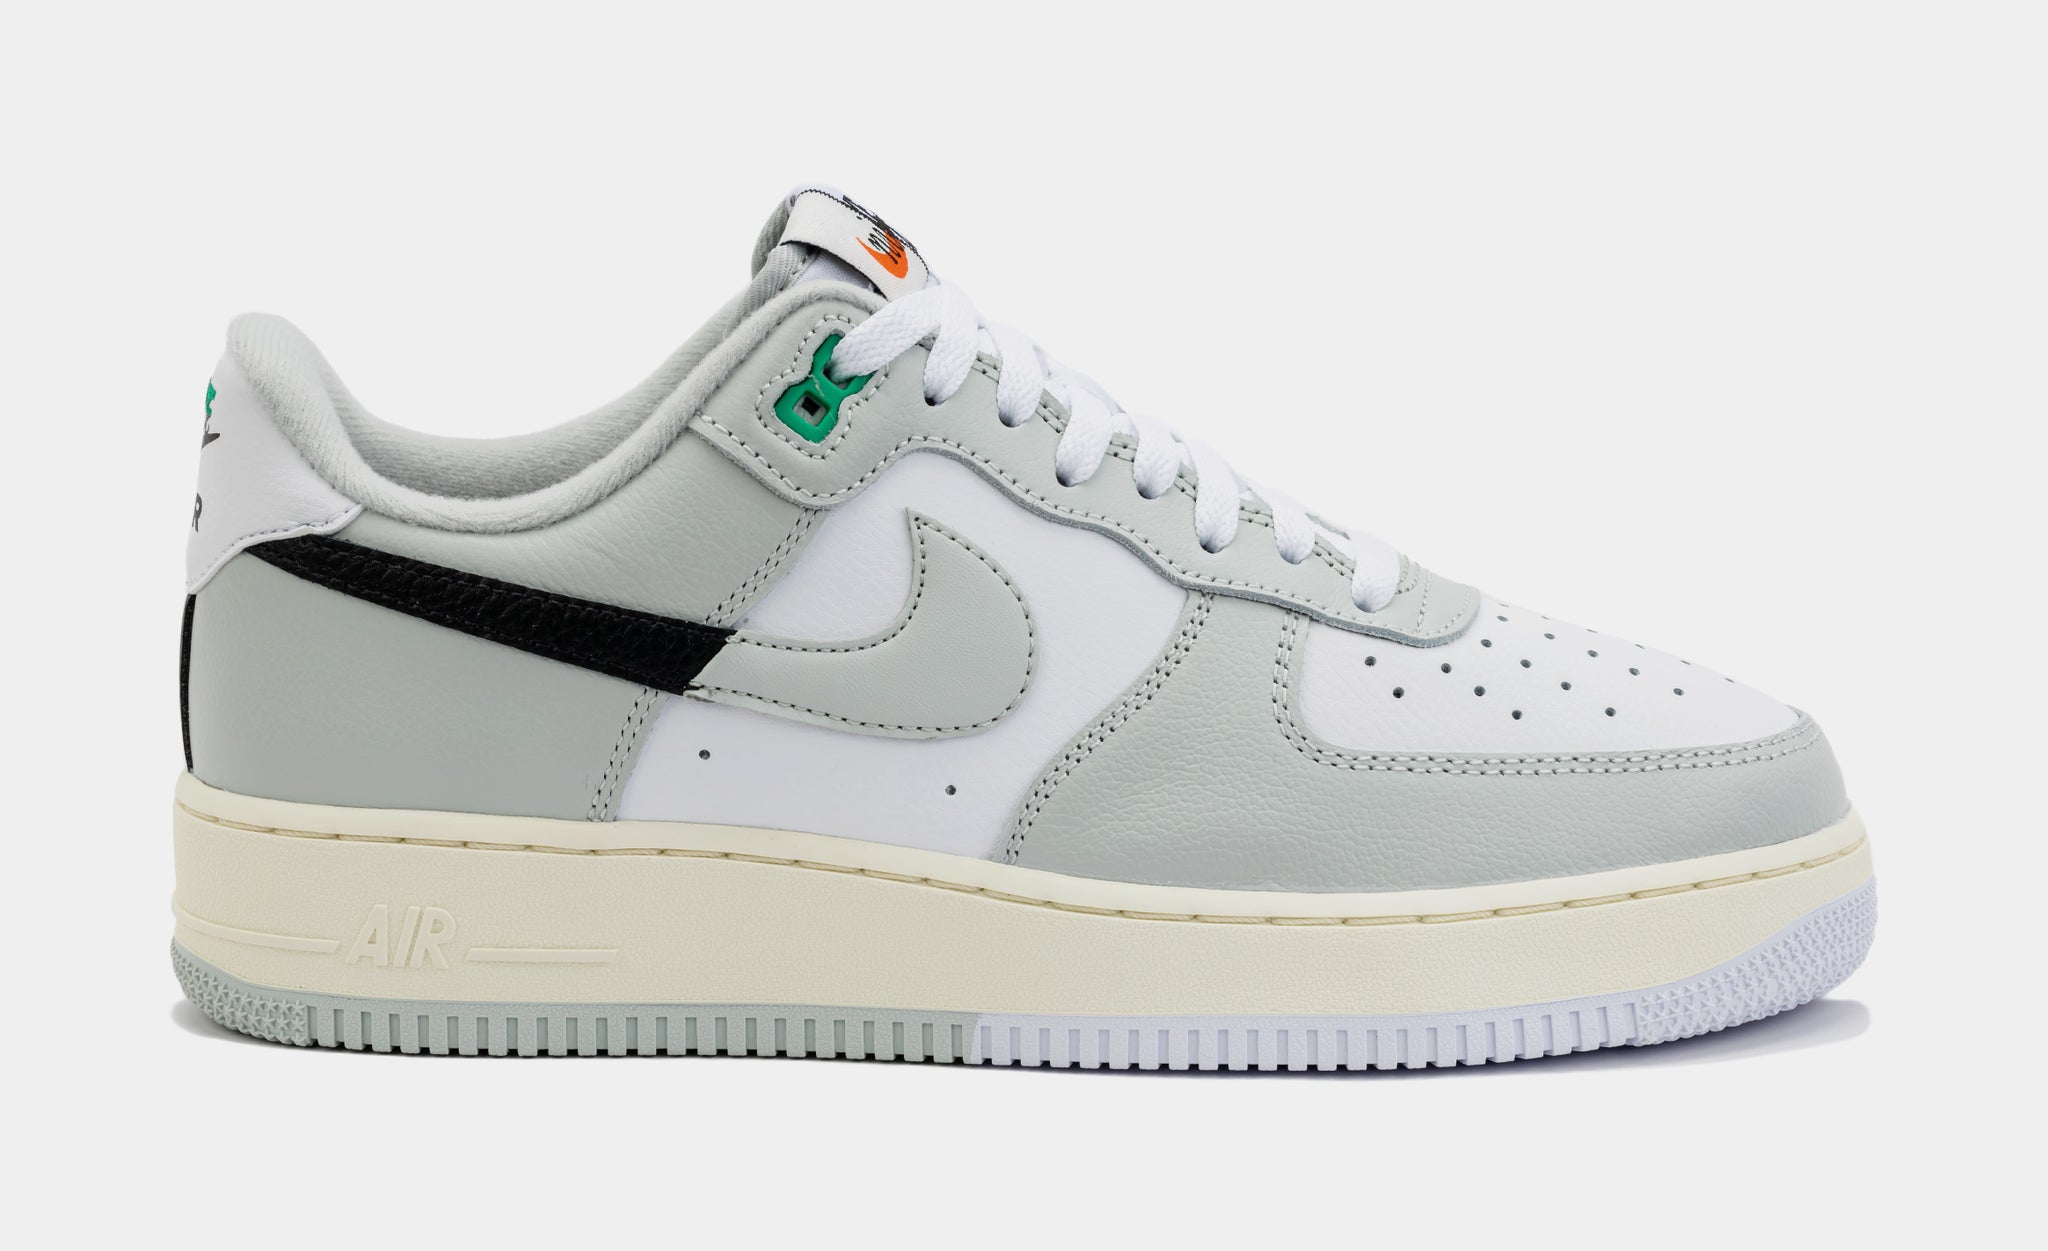 Air Force 1 Low Split Mens Lifestyle Shoes (White/Grey)